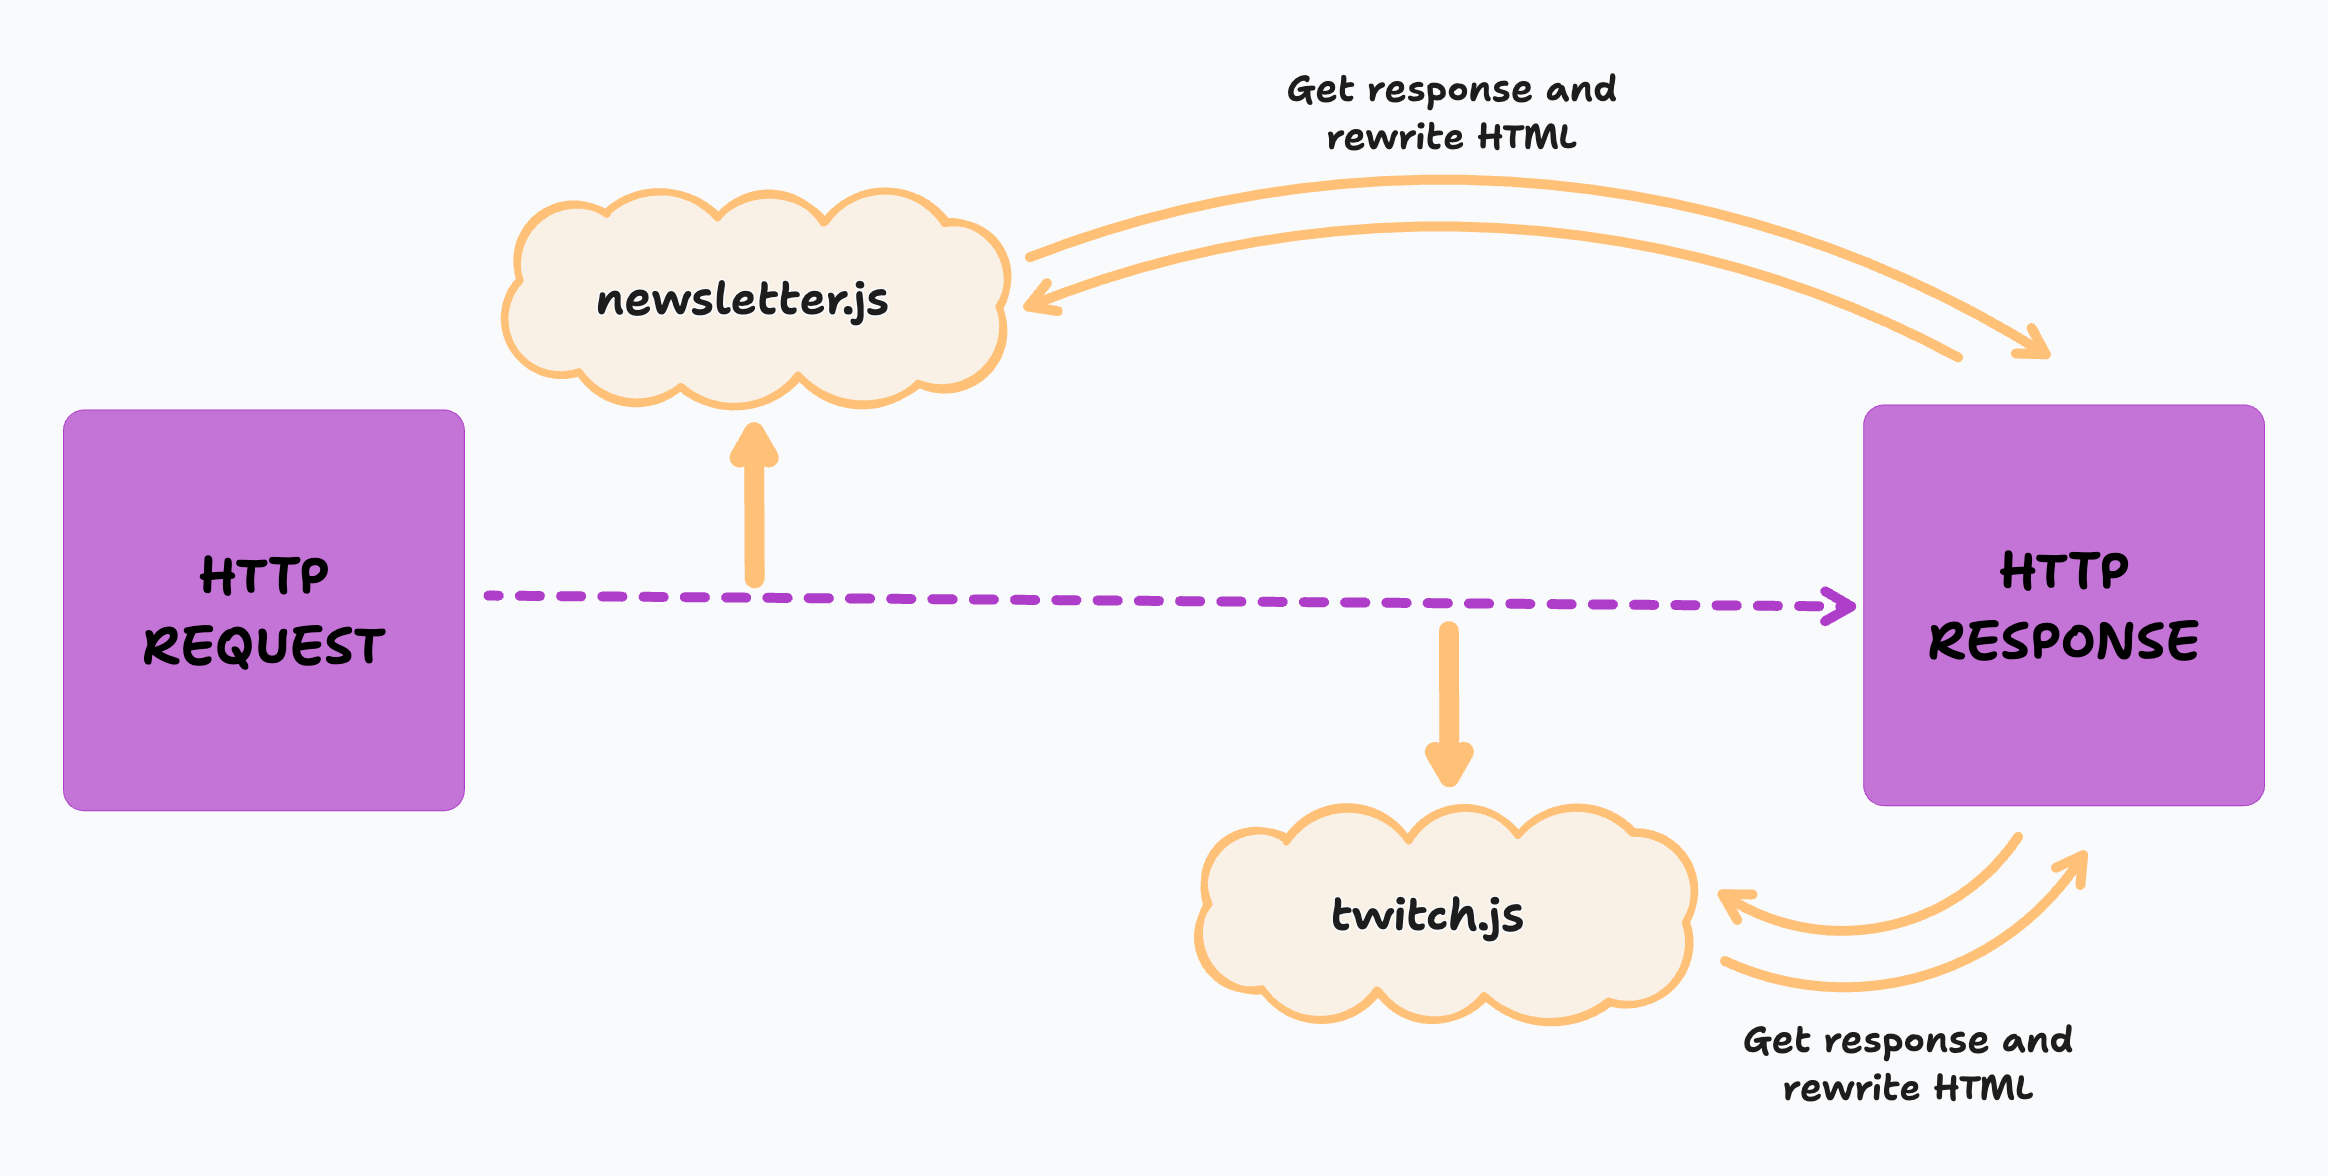 An HTTP request is made. A newsletter.js file intercepts the request, modifies the HTML and returns it to the chain. Next, a twitch.js file intercepts the request again, modifies the HTML and returns the HTTP response.